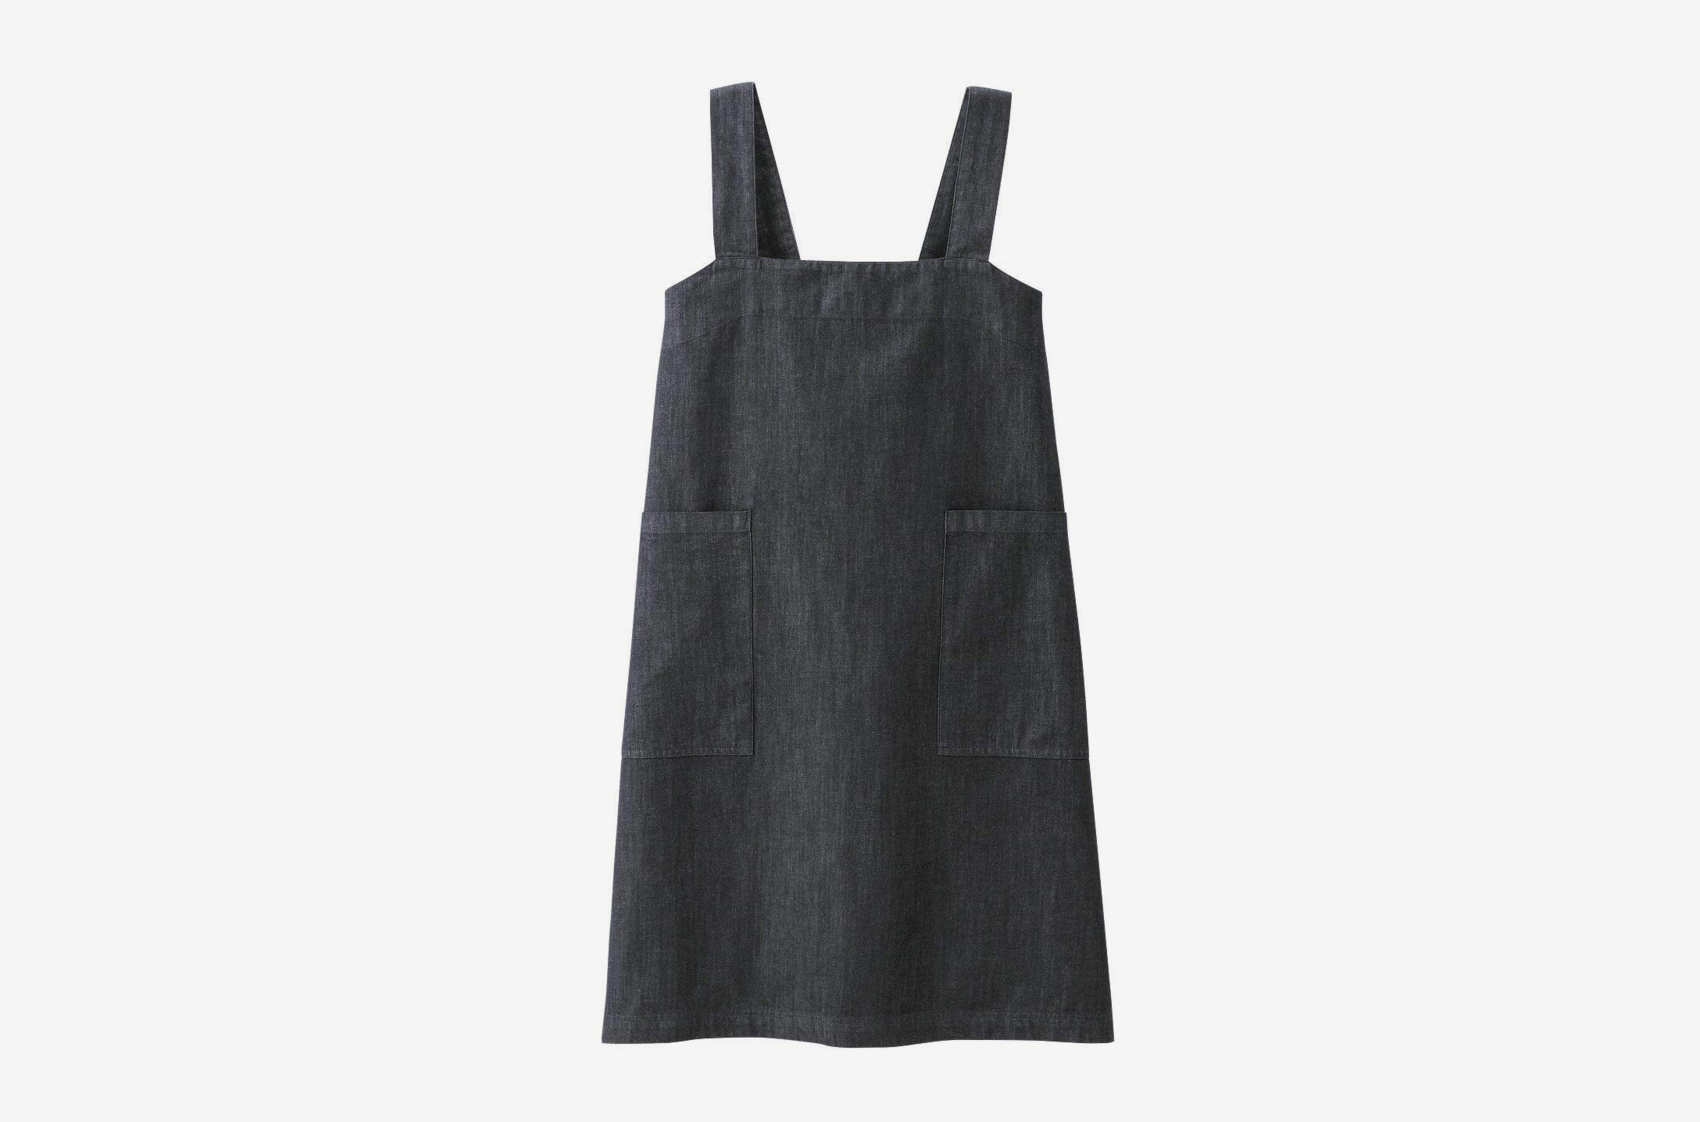 The Best Aprons for Cooking, Reviewed by Chefs 2018